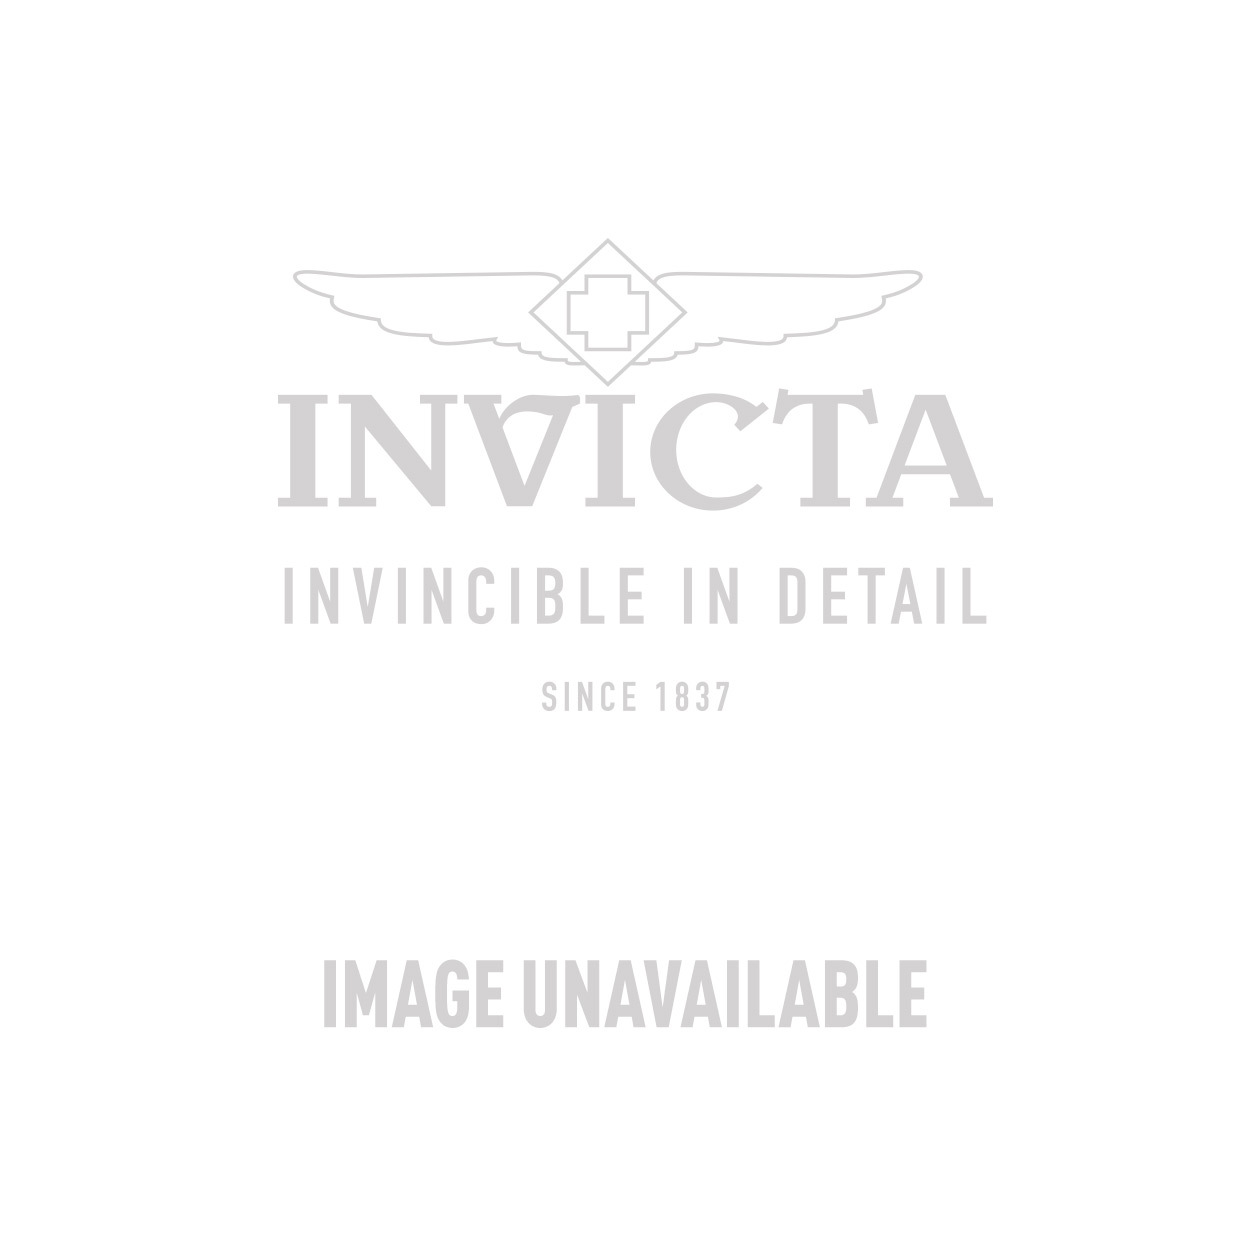 Invicta Angel Swiss Movement Quartz Watch - Gold case with Gold tone Stainless Steel band - Model 0465